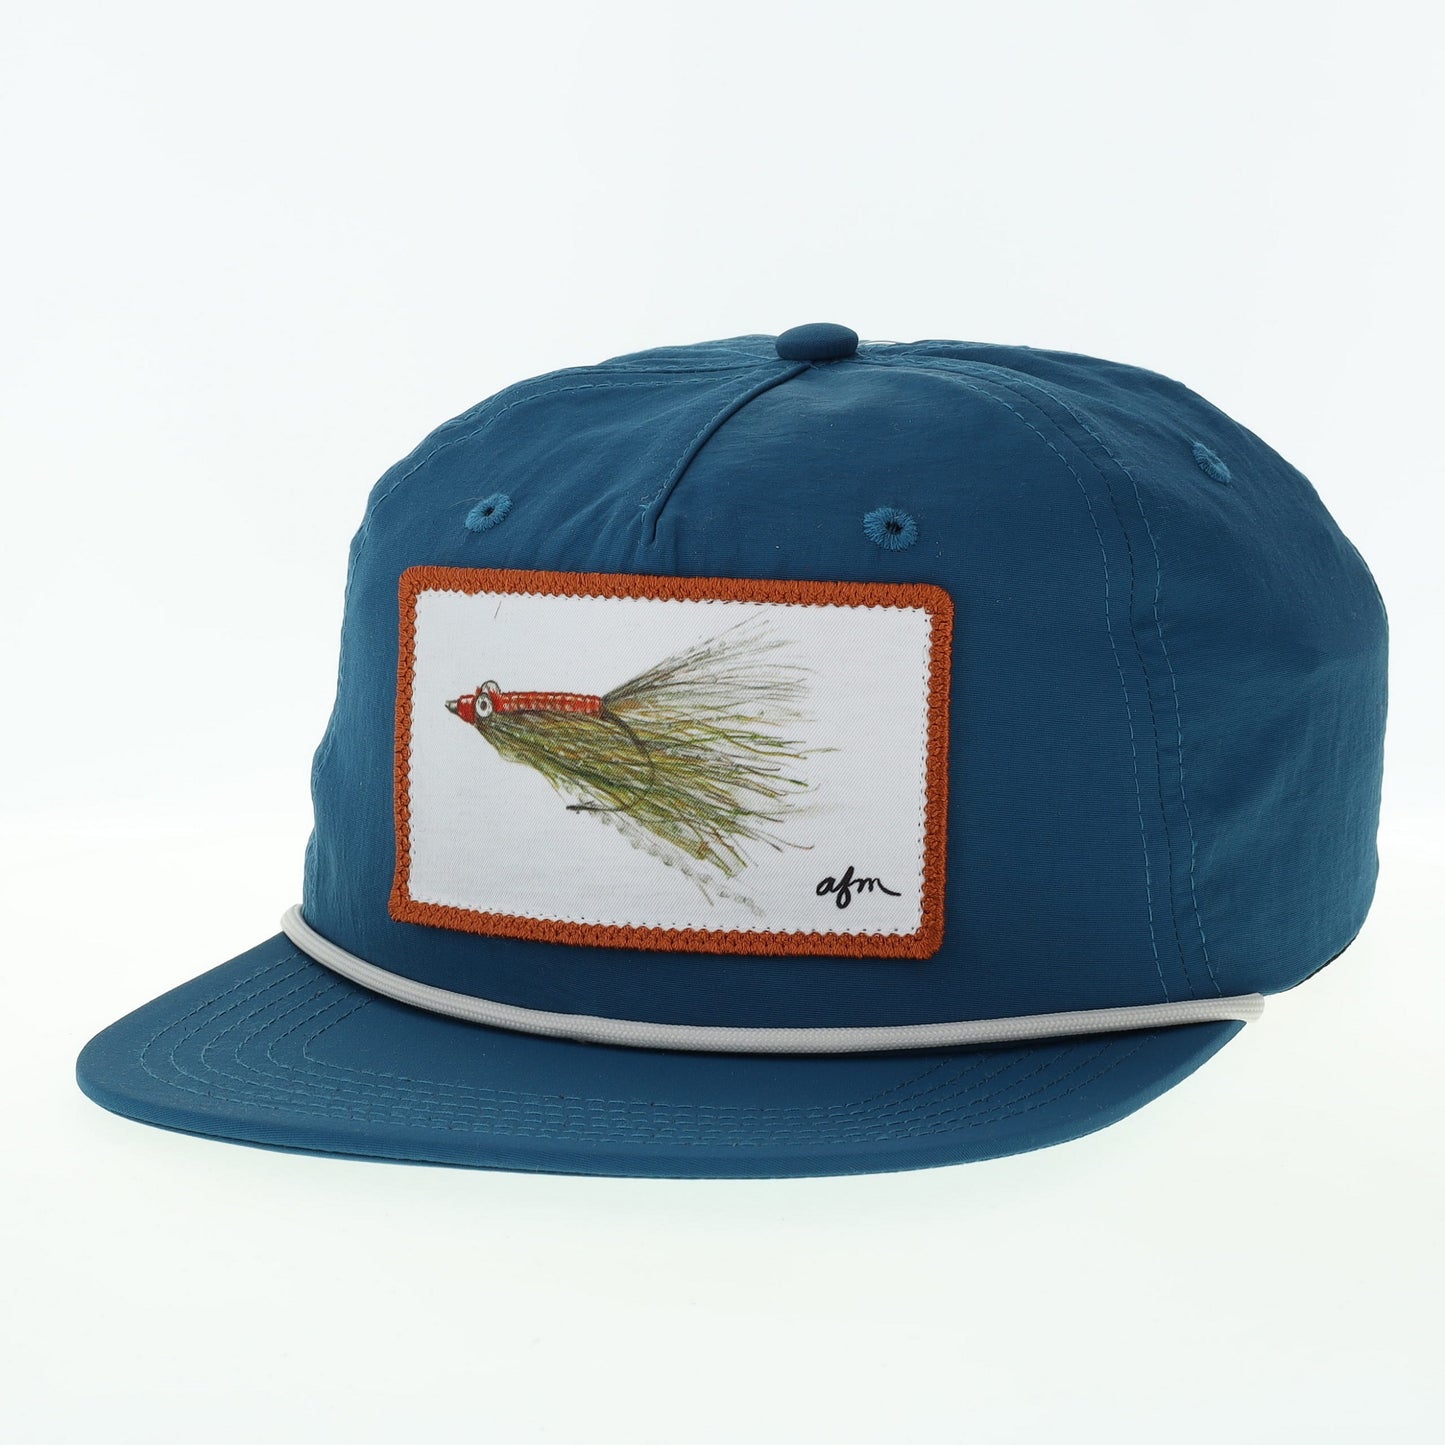 Gotcha CHILL Hat in Marine Blue with Rope